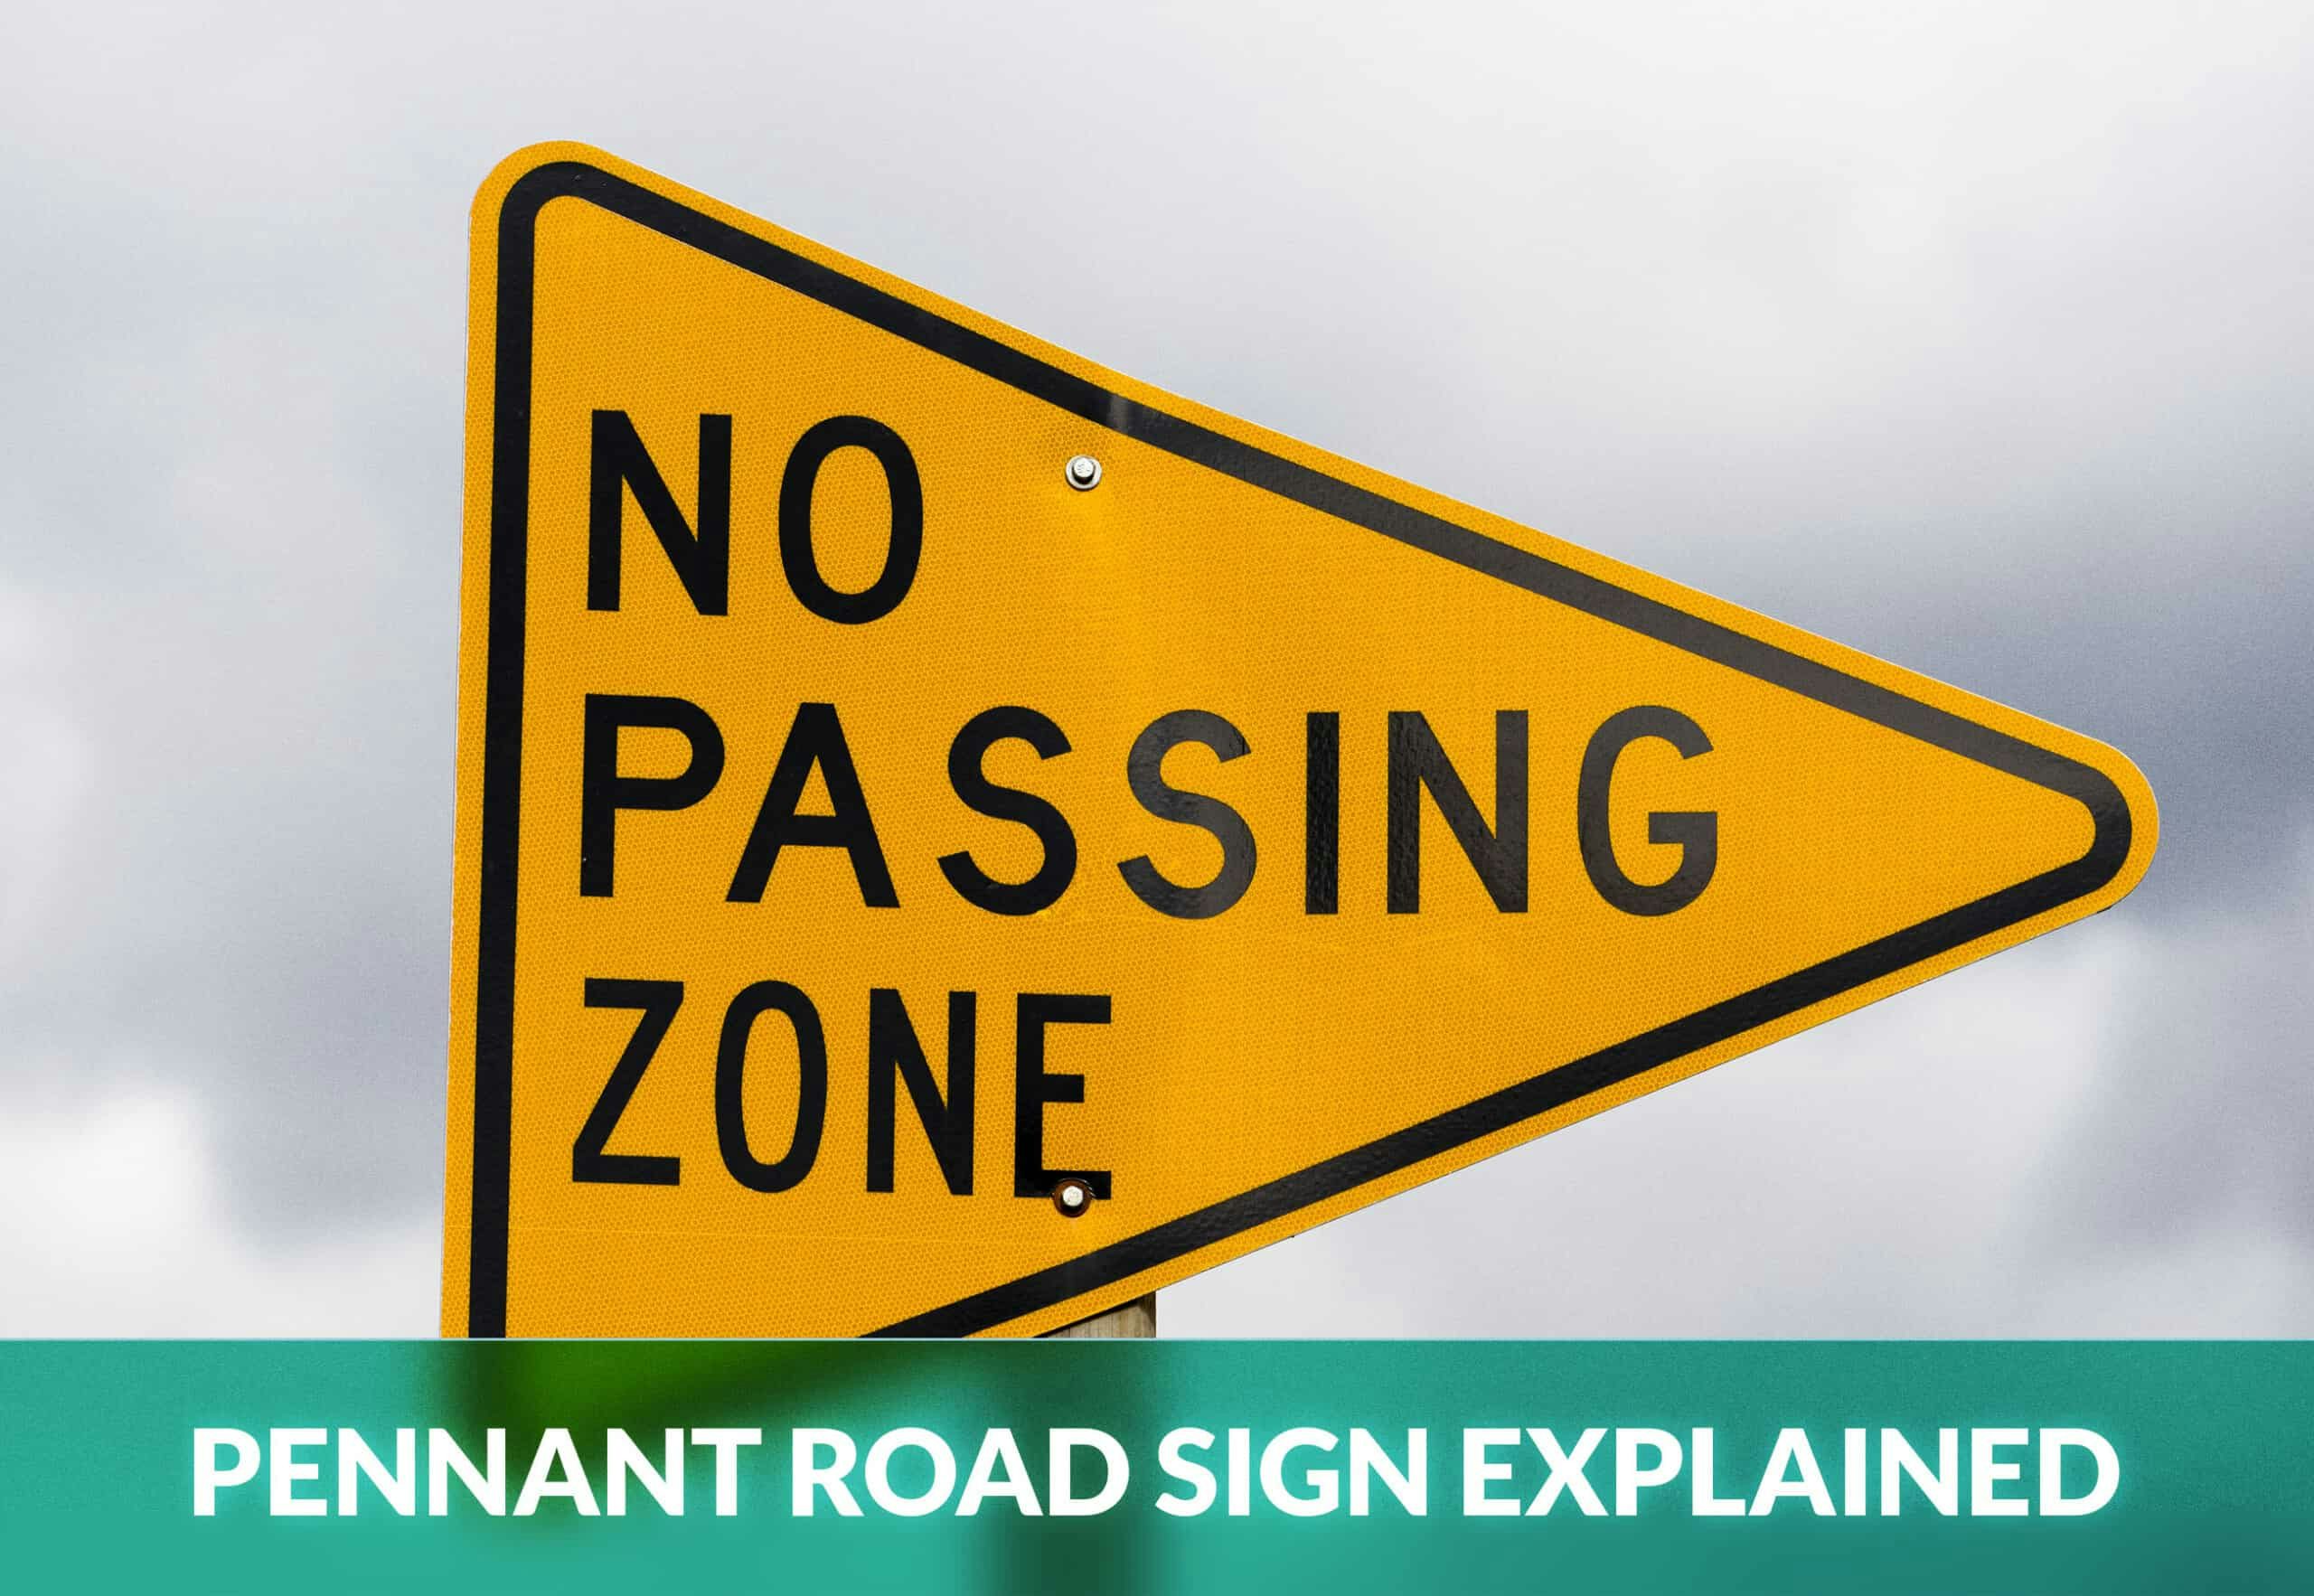 PENNANT ROAD SIGN EXPLAINED